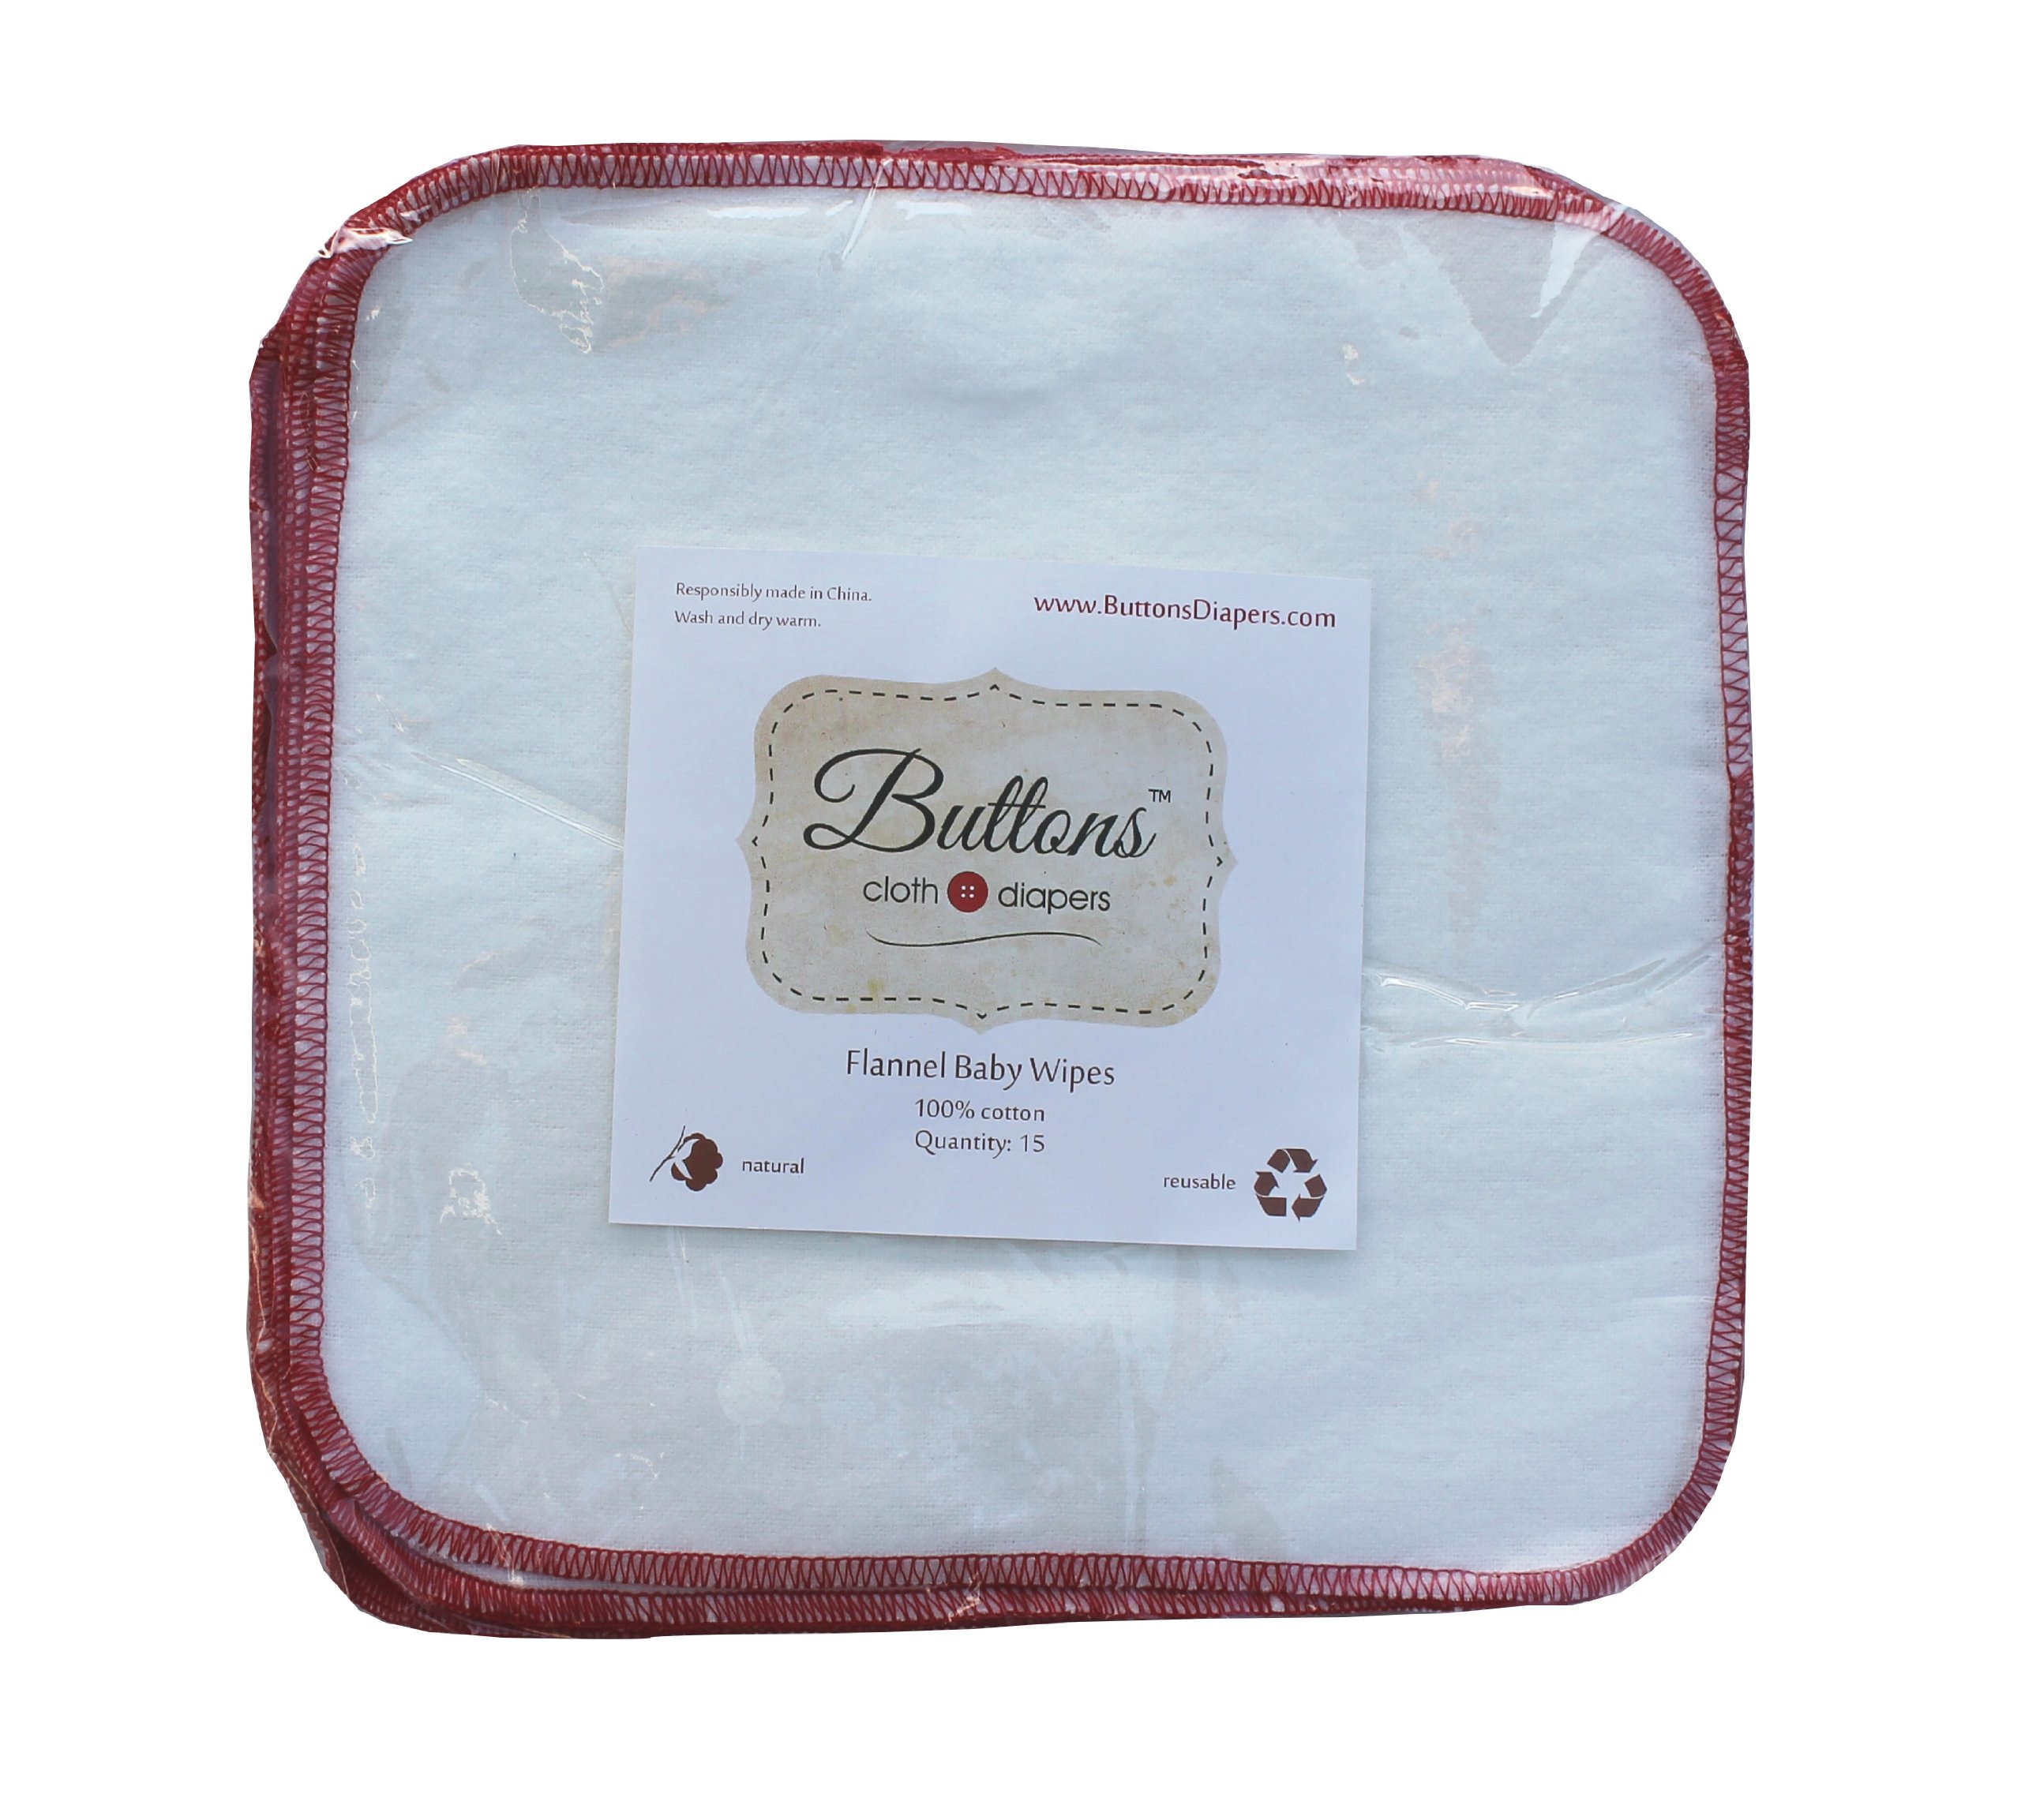 Buttons Flannel Baby Reusable Washable Natural Unbleached Wipes - 15 Pack